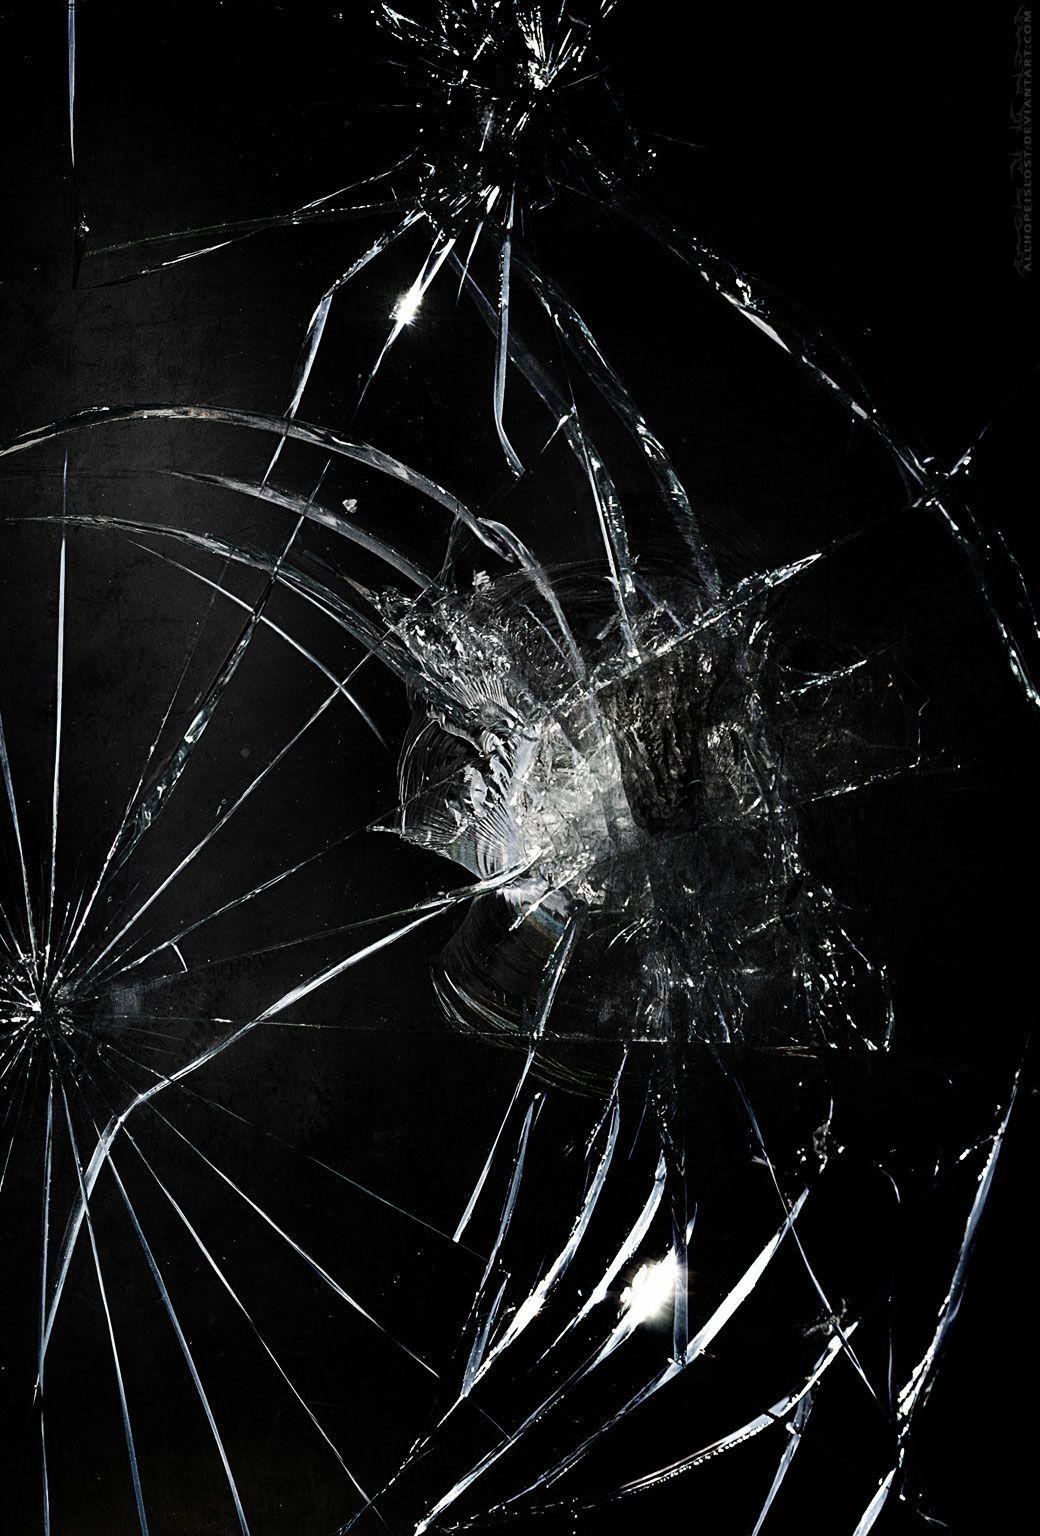 Best Cracked Screen Wallpaper For Android FULL HD 1080p For PC